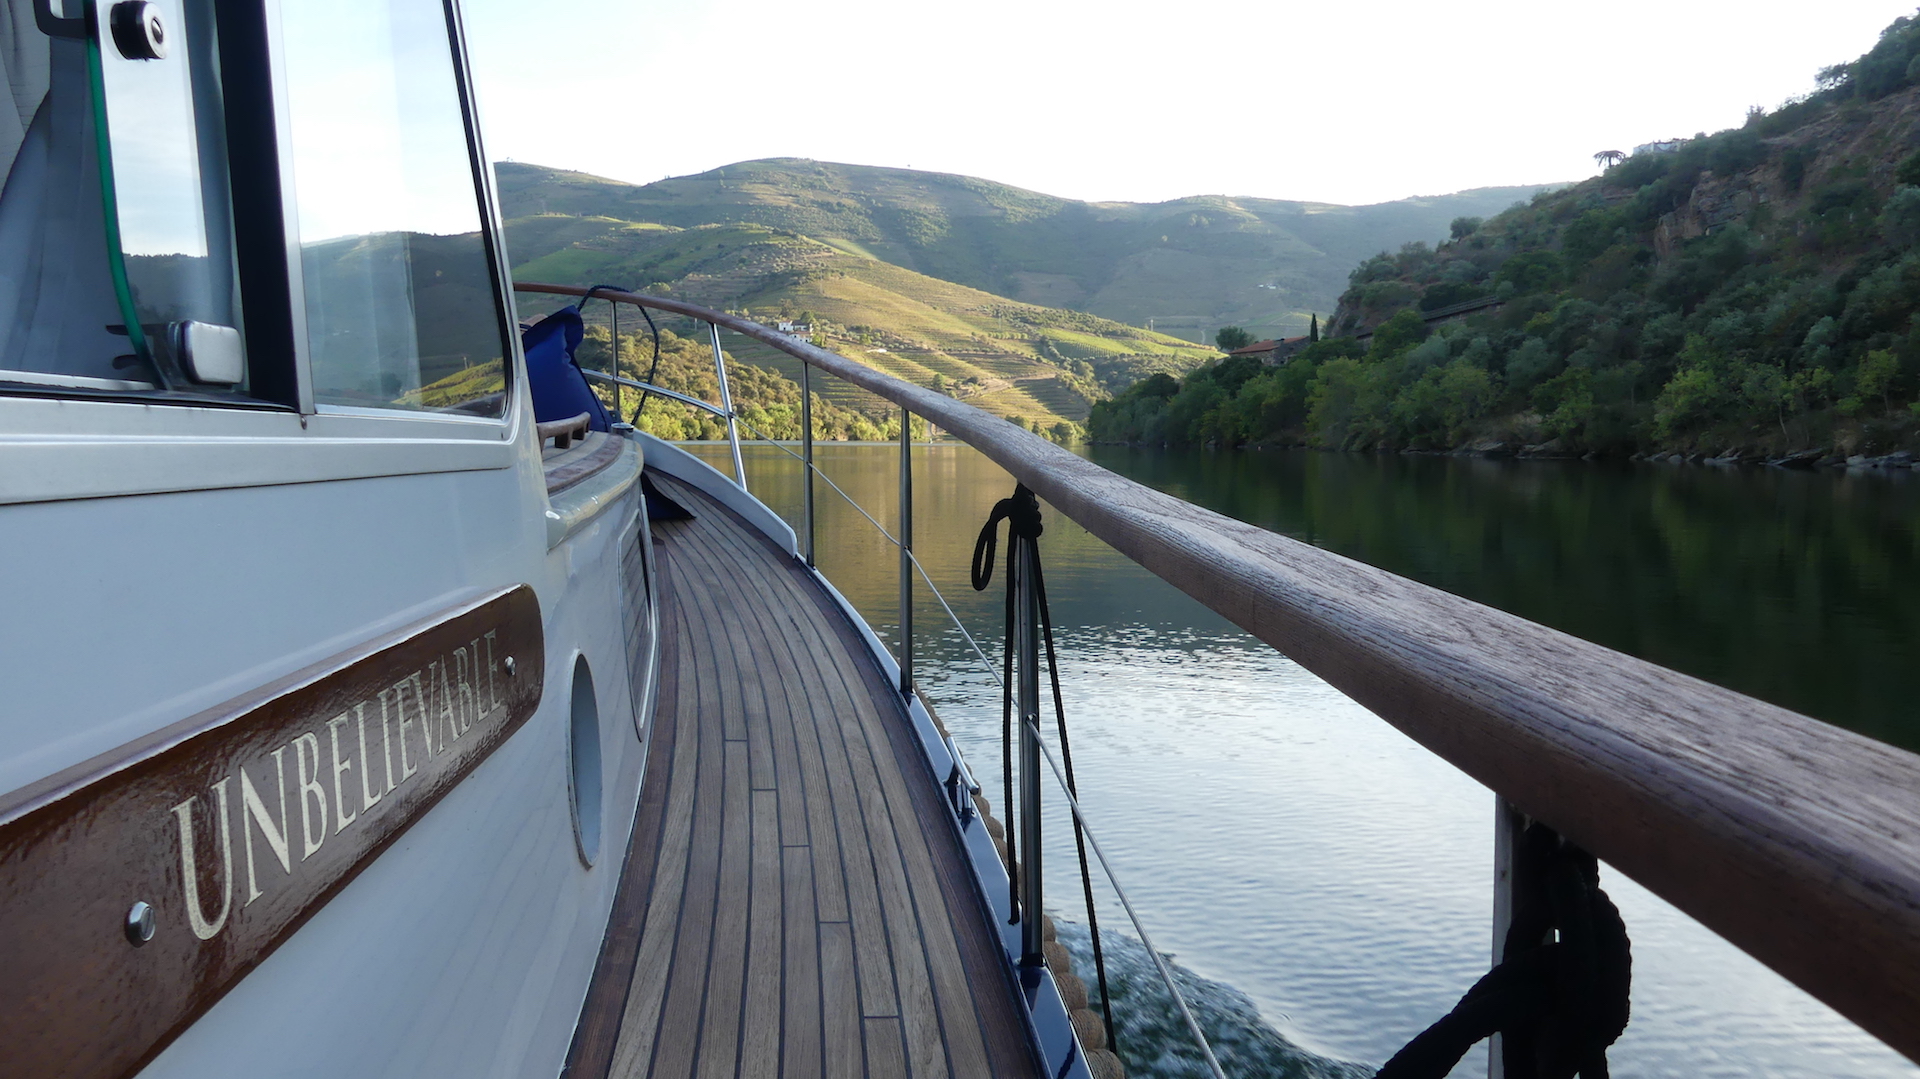 Enjoy the view from your boats in the Douro River